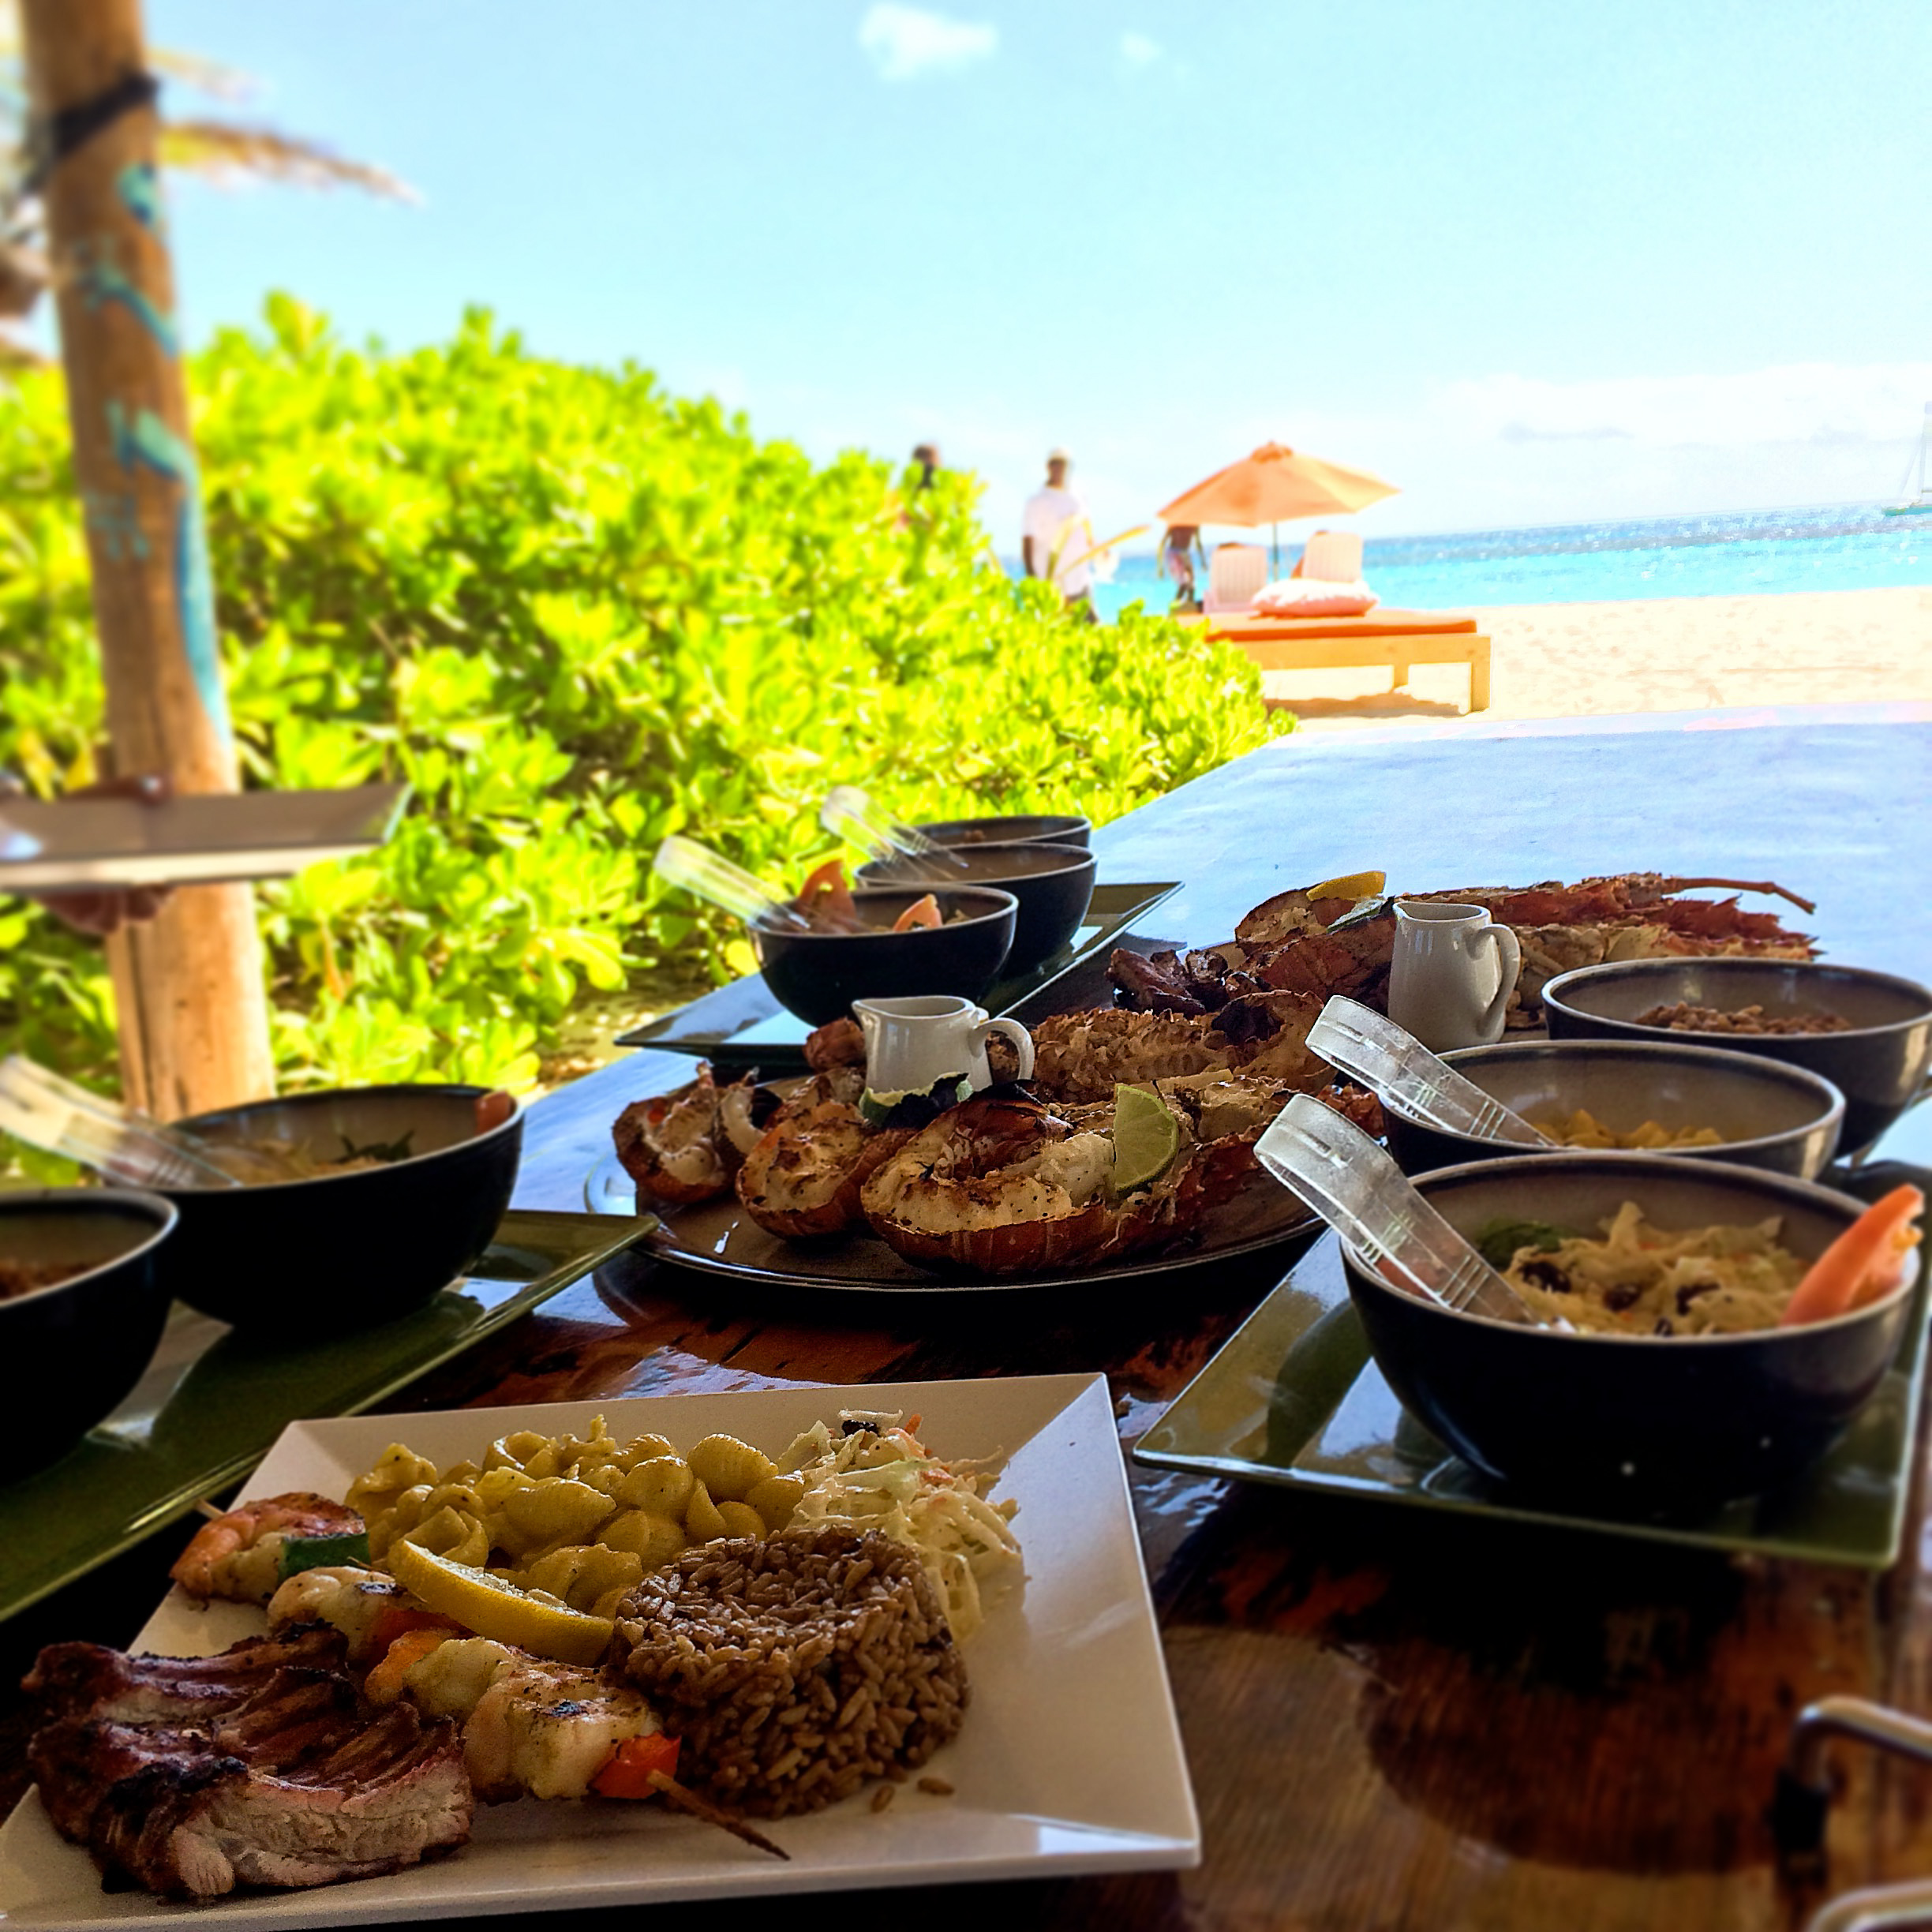 The full spread for lunch at Sandy Island - don't forget to order the sticky ribs with your Crustaceans!